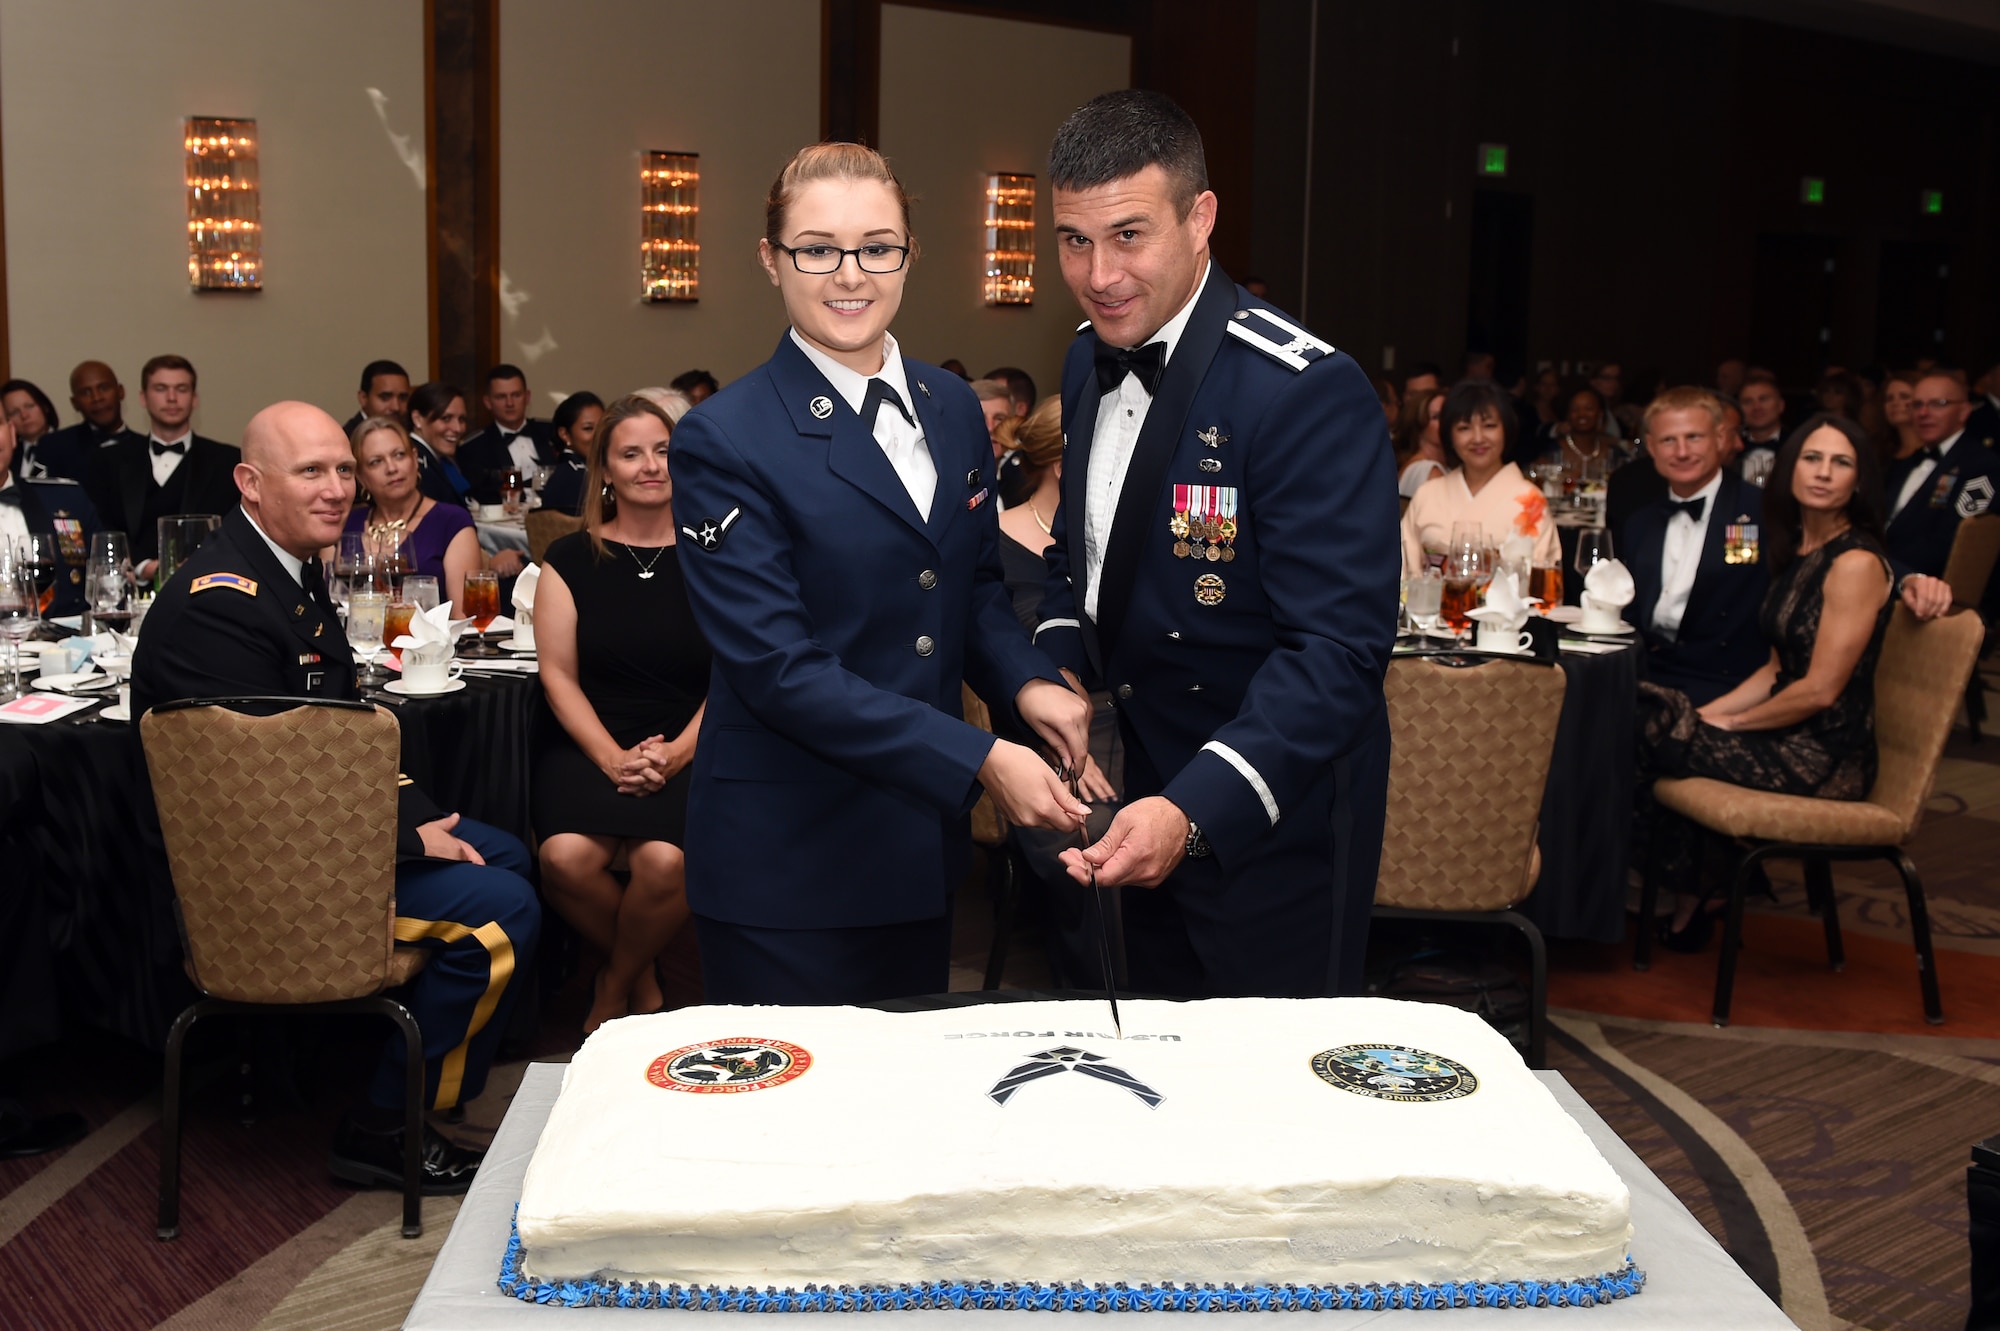 Airman Emily E. Amyotte, 460th Space Wing Public Affairs photojournalist, left, and Col. John Wagner, 460th Space Wing commander, cut the cake during the Air Force Ball and 460th Space Wing 10th anniversary celebration Sept. 27, 2014, at the Grand Hyatt Hotel in Denver. Every year, the Air Force celebrates its birthday with a formal military ball and festivities many people remember for a lifetime. Buckley Air Force Base did their part to wish the Air Force and the 460th SW a happy birthday with dinner, a guest speaker and a nighttime celebration. (U.S. Air Force photo by Airman Emily E. Amyotte/Released)